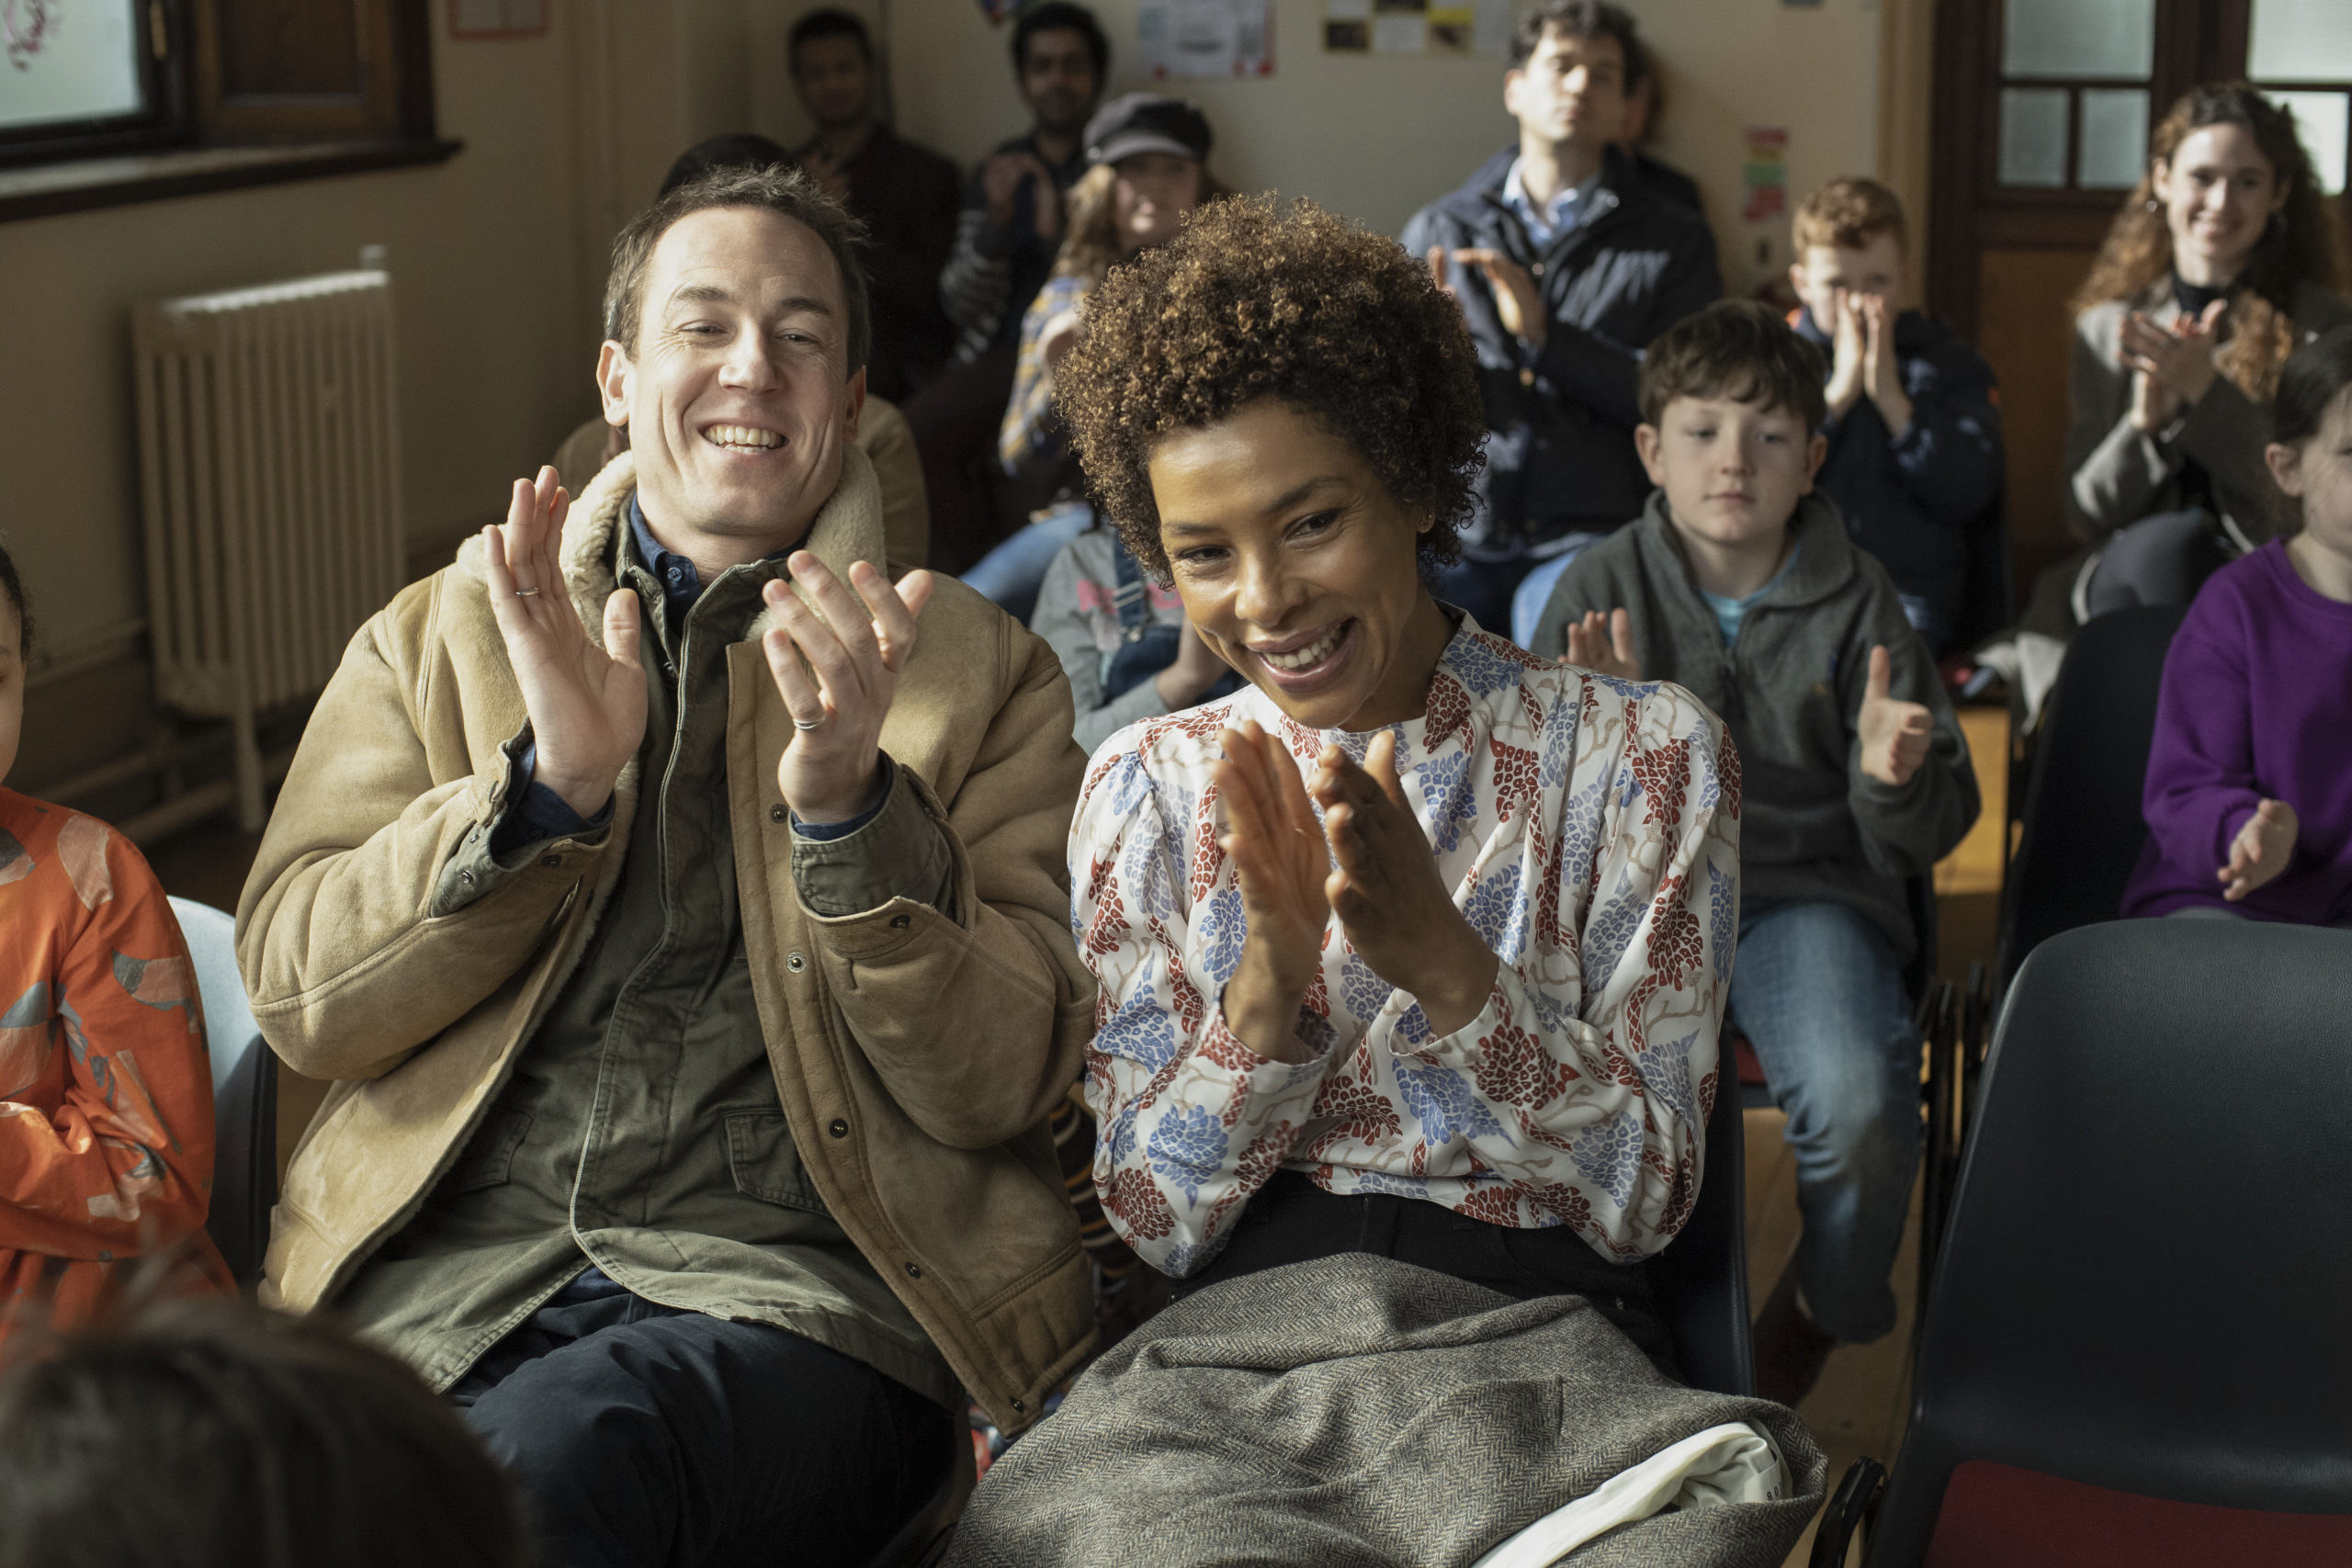 Sophie Okonedo and Tobias Menzies in Episode 8: “Second Embrace, With Hearts and Eyes Open”